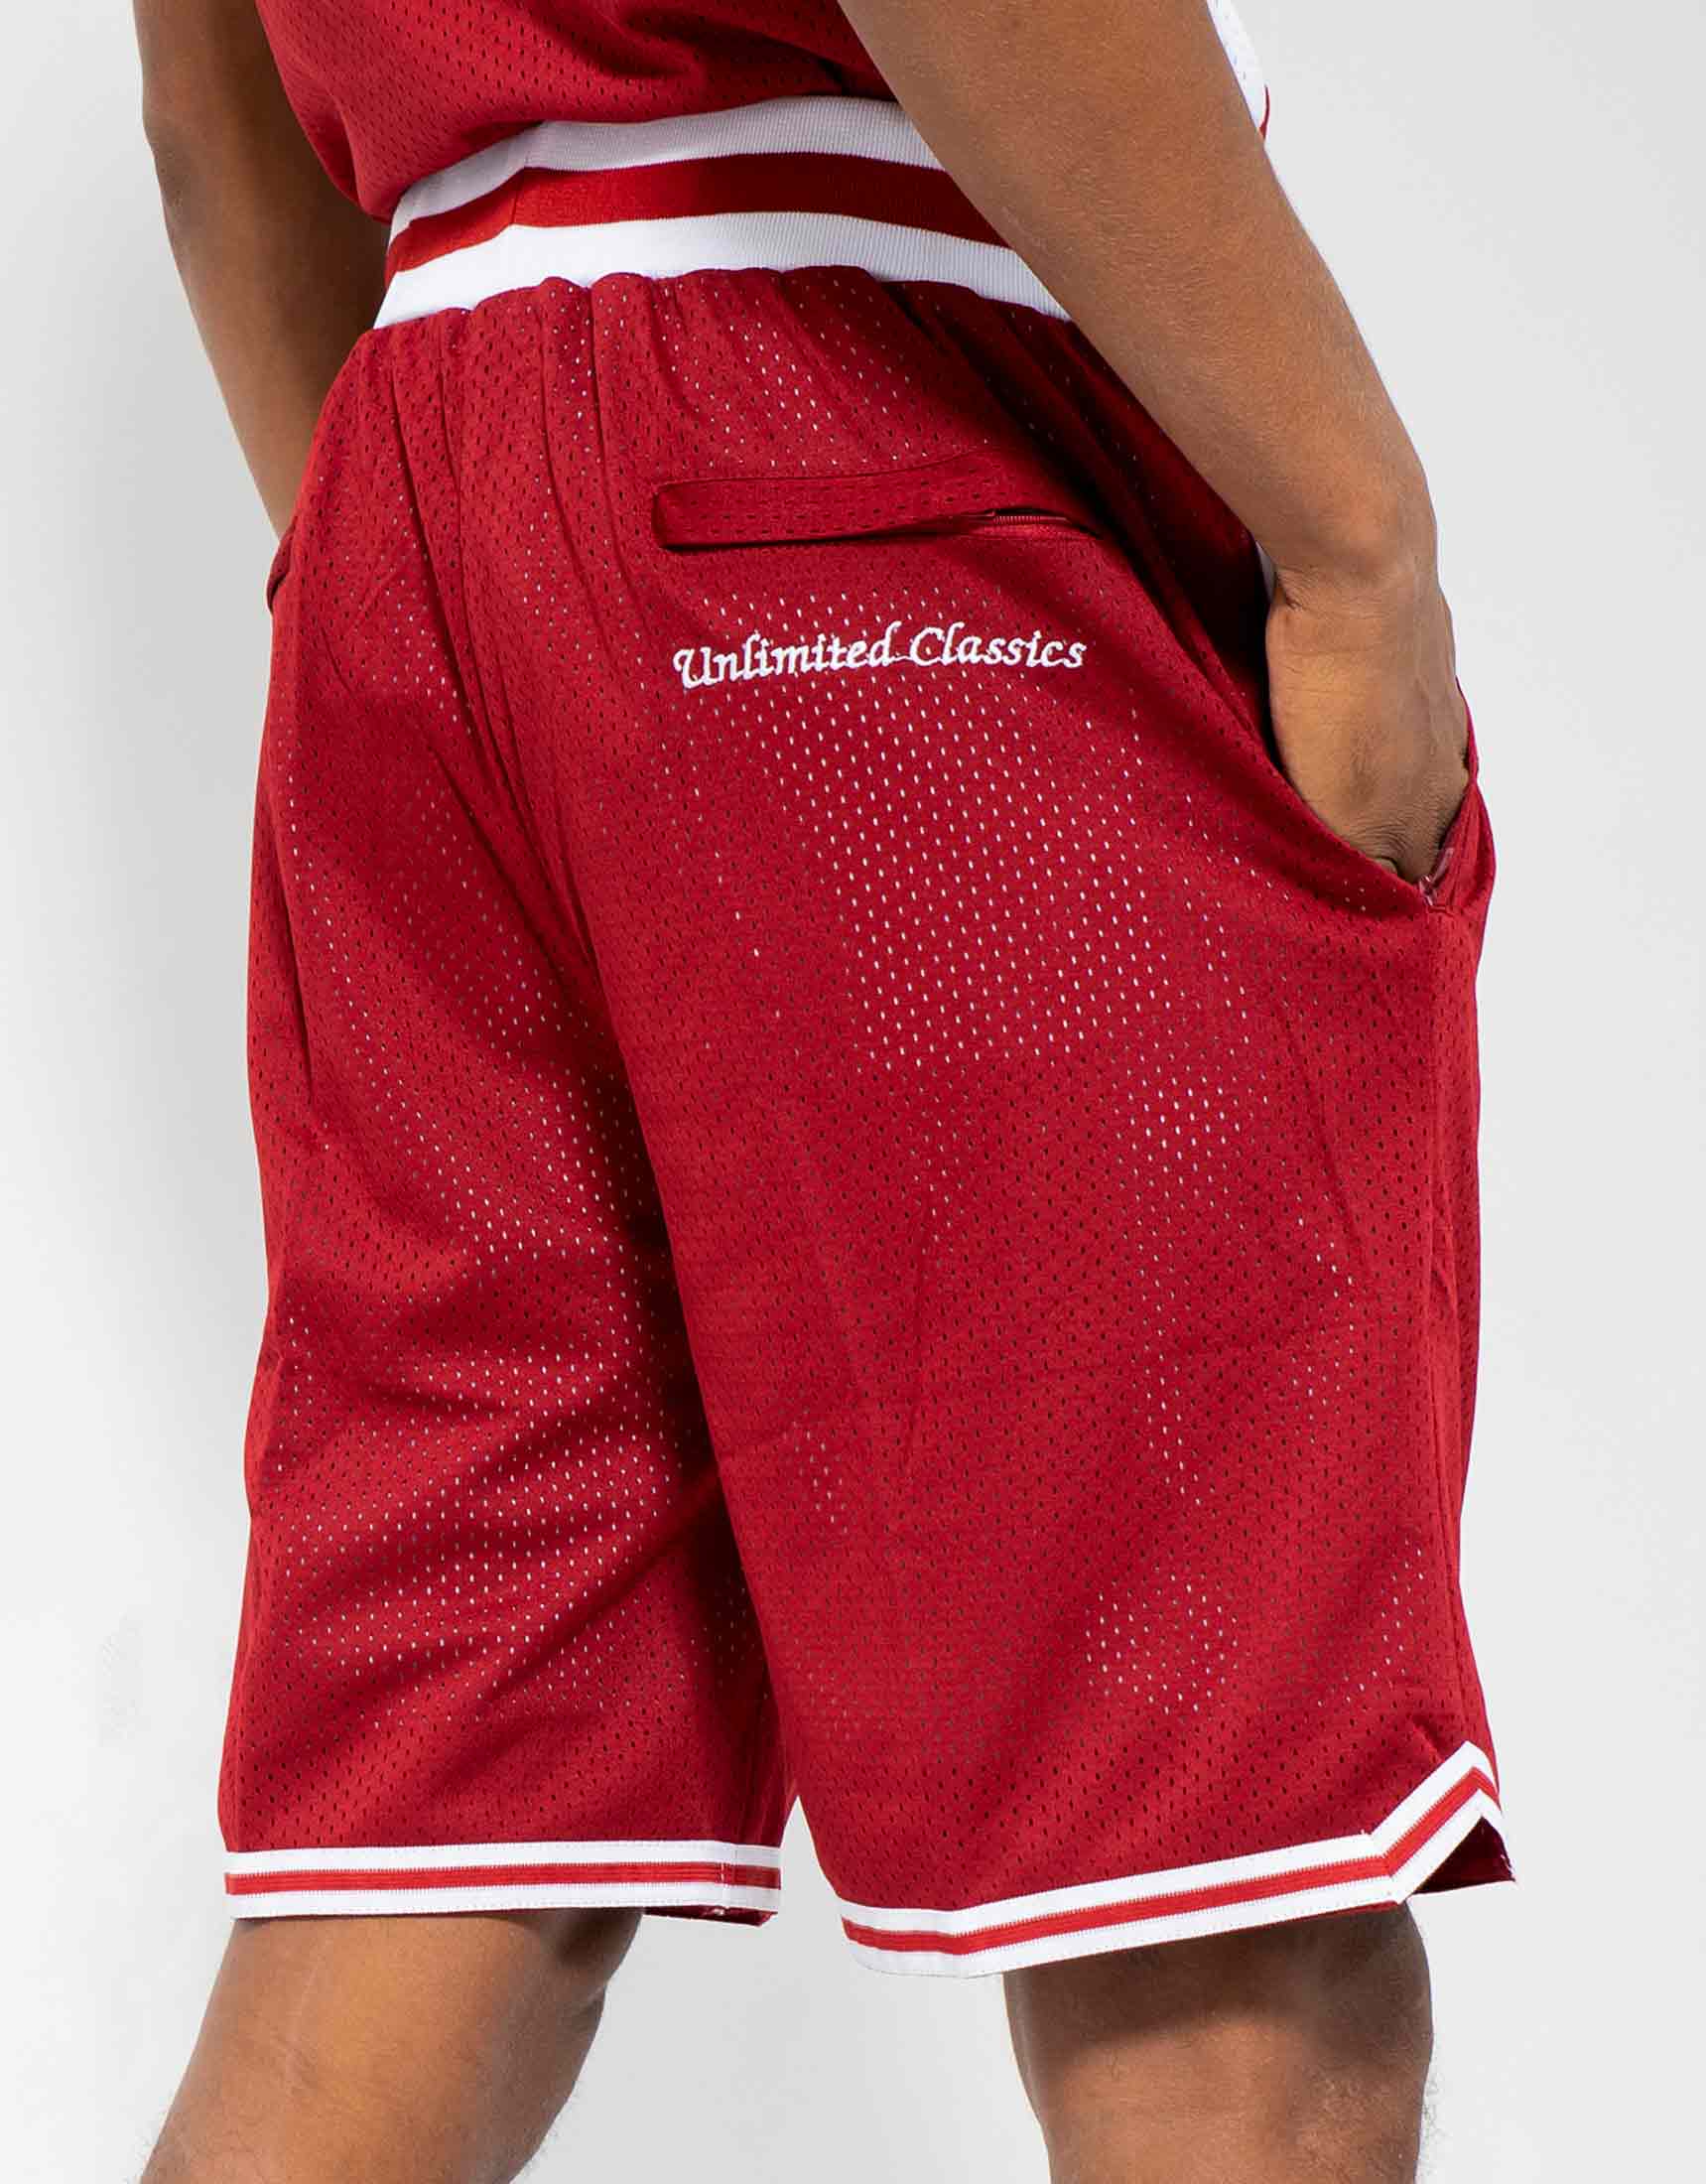 Bryant #33 Lower Merion High School Basketball Shorts Unlimited Classics